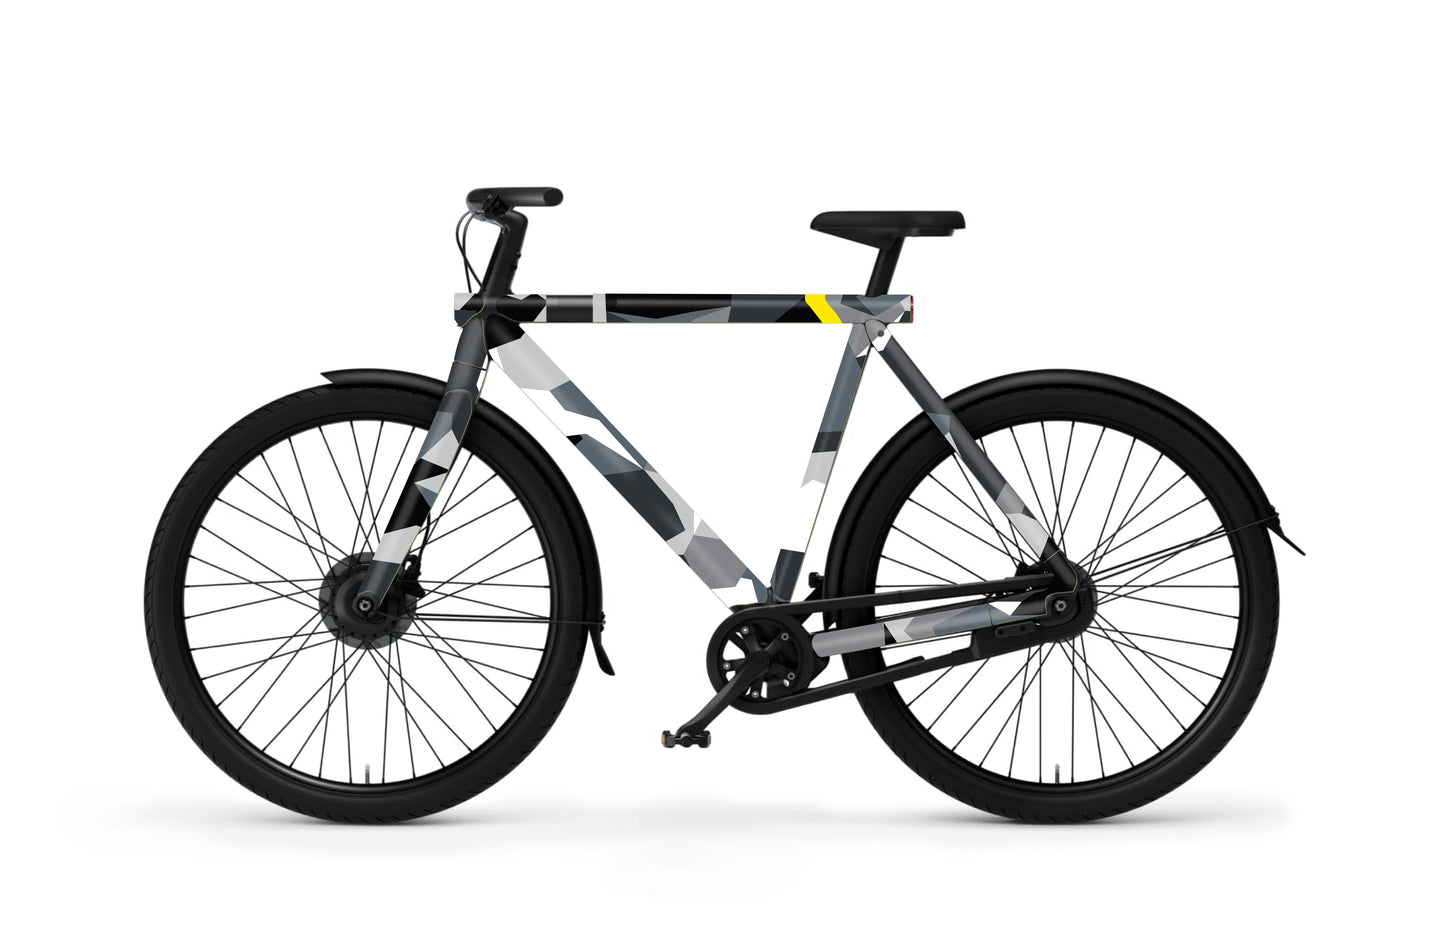 GREY CAMO PROTECT KIT FOR VANMOOF S2/S3